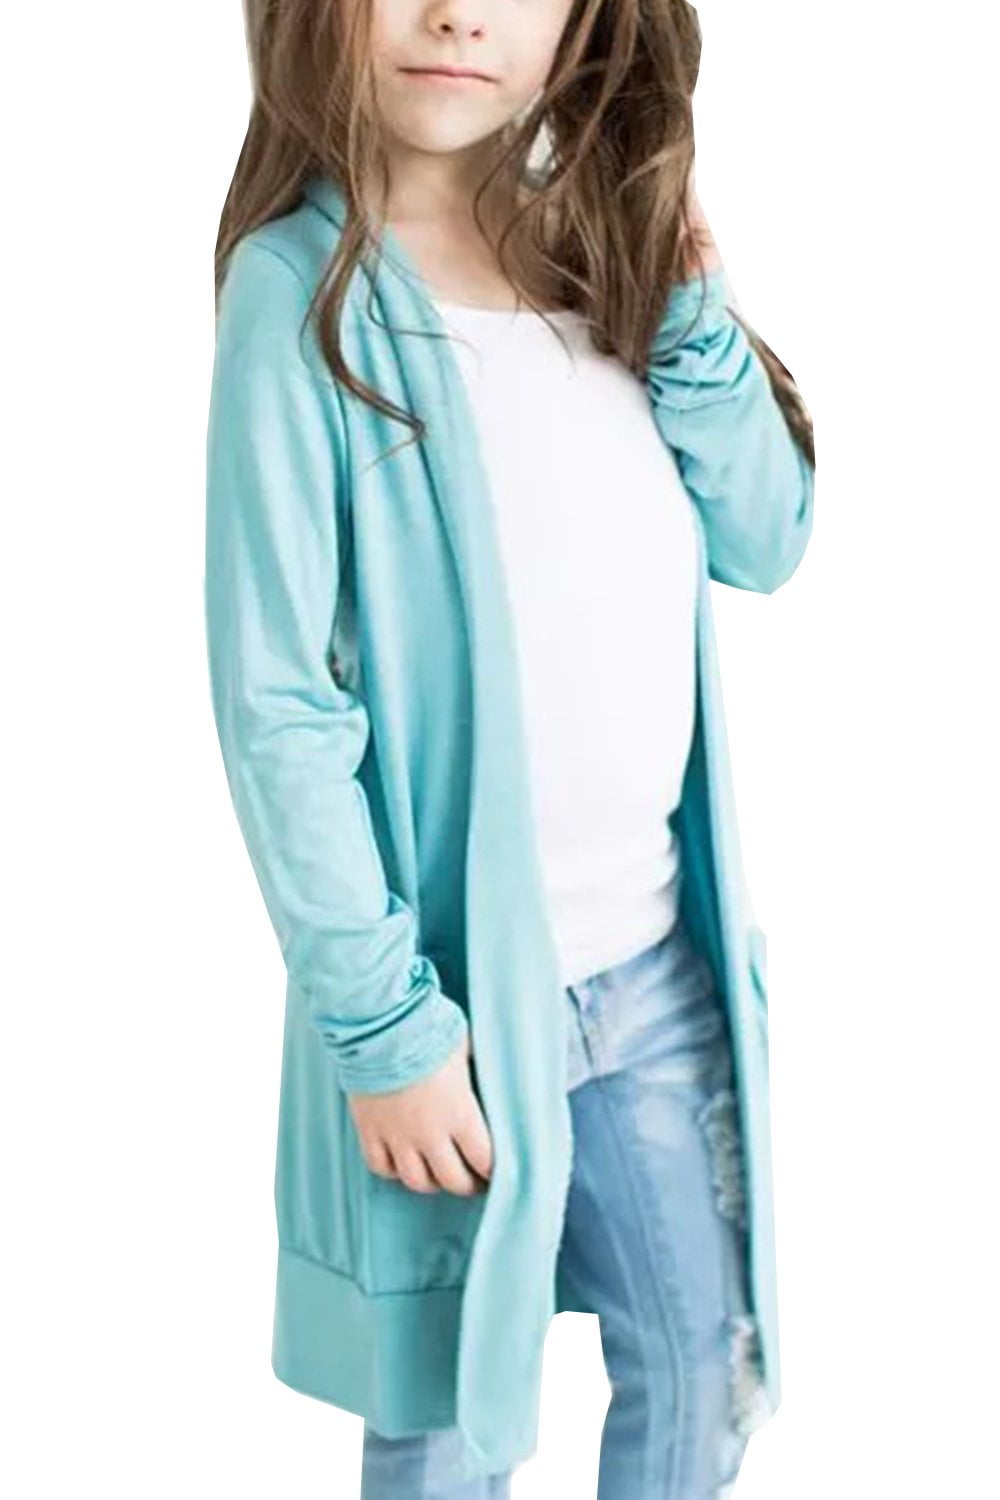 Loxdonz Kids Girls Boyfriend Cardigan Open Front Casual Long Sleeve Fashion Top with Pockets Age 5-13 Years 